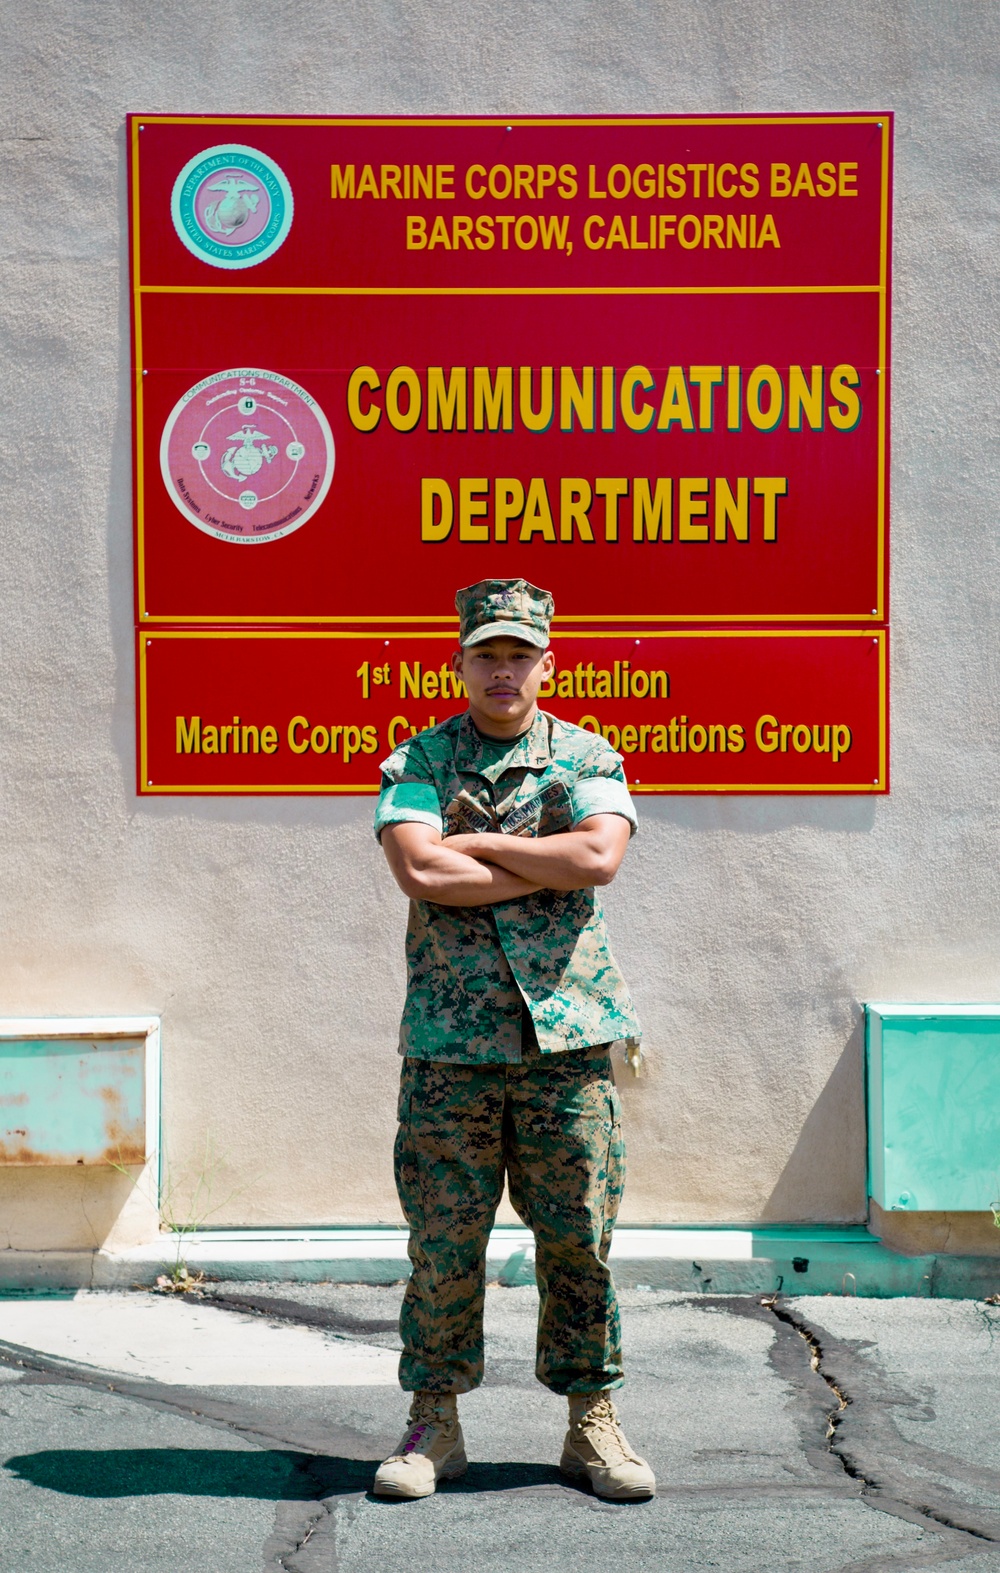 Pfc. Erwin C. Mariano Stands at the MCLB Barstow Communications Department